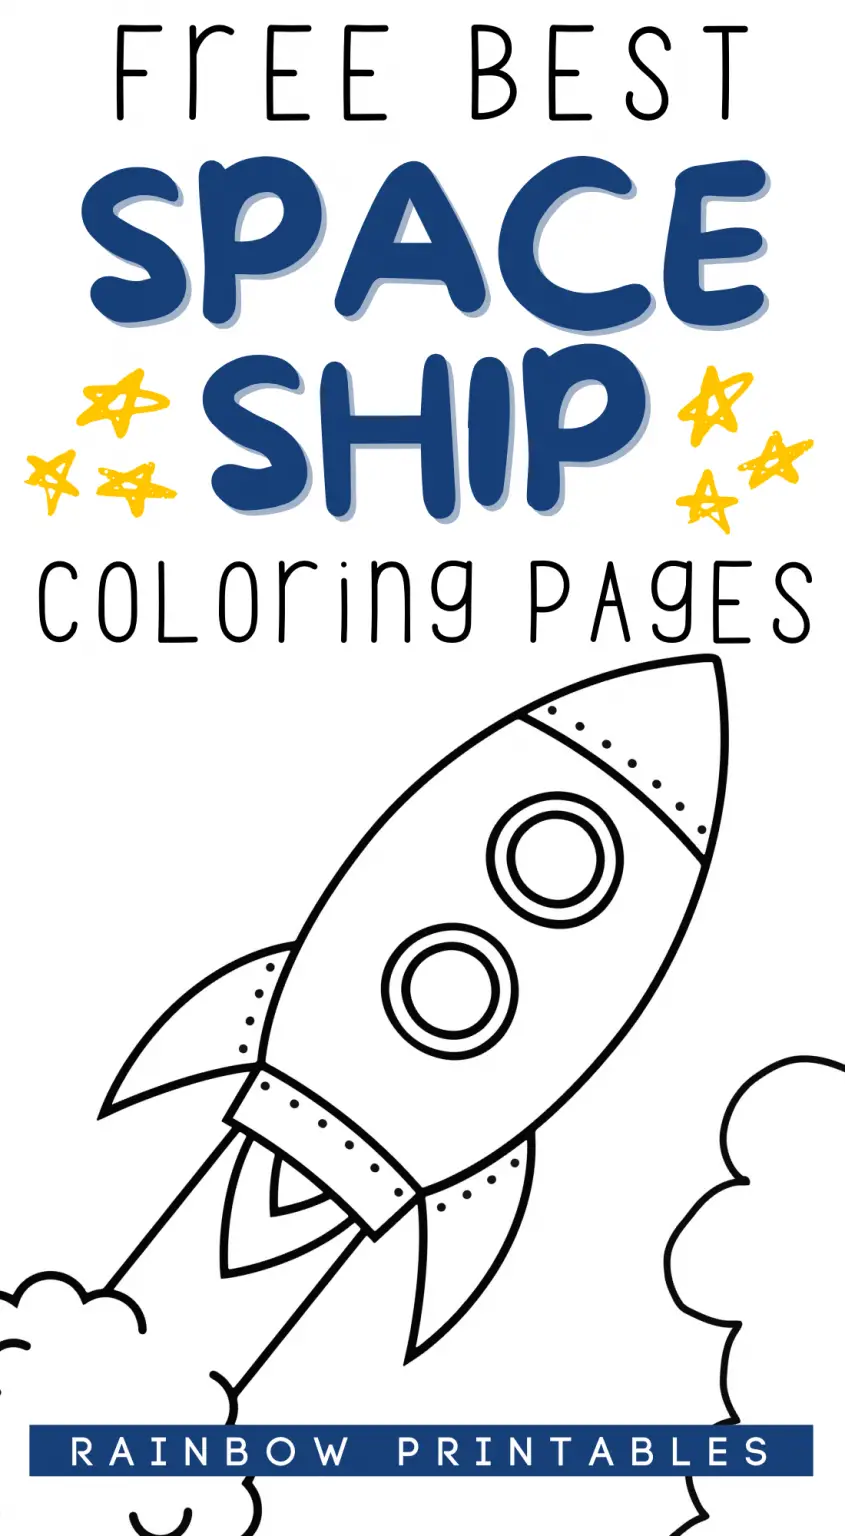 11 Rocket Ship, Cute Aliens & UFO in Outer Space Coloring Pages For